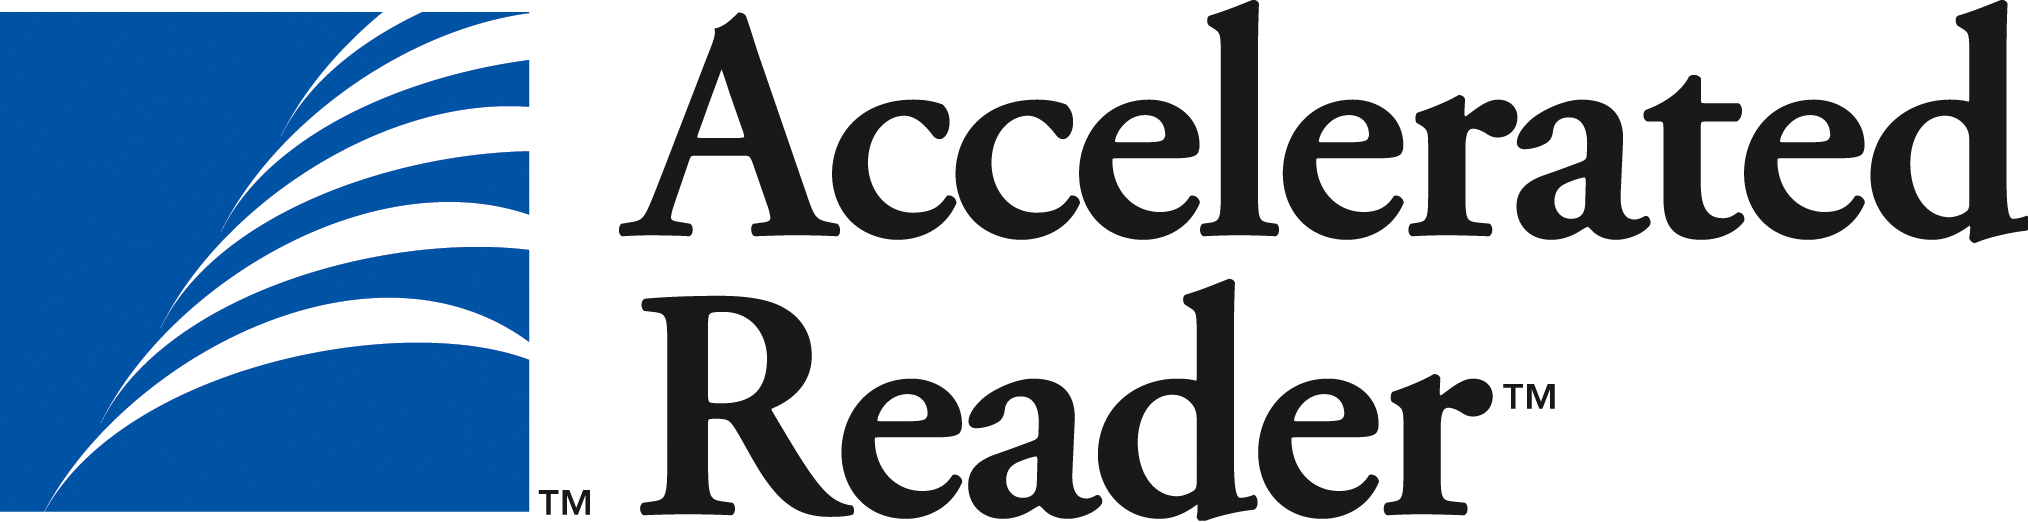 Accelarated Reader